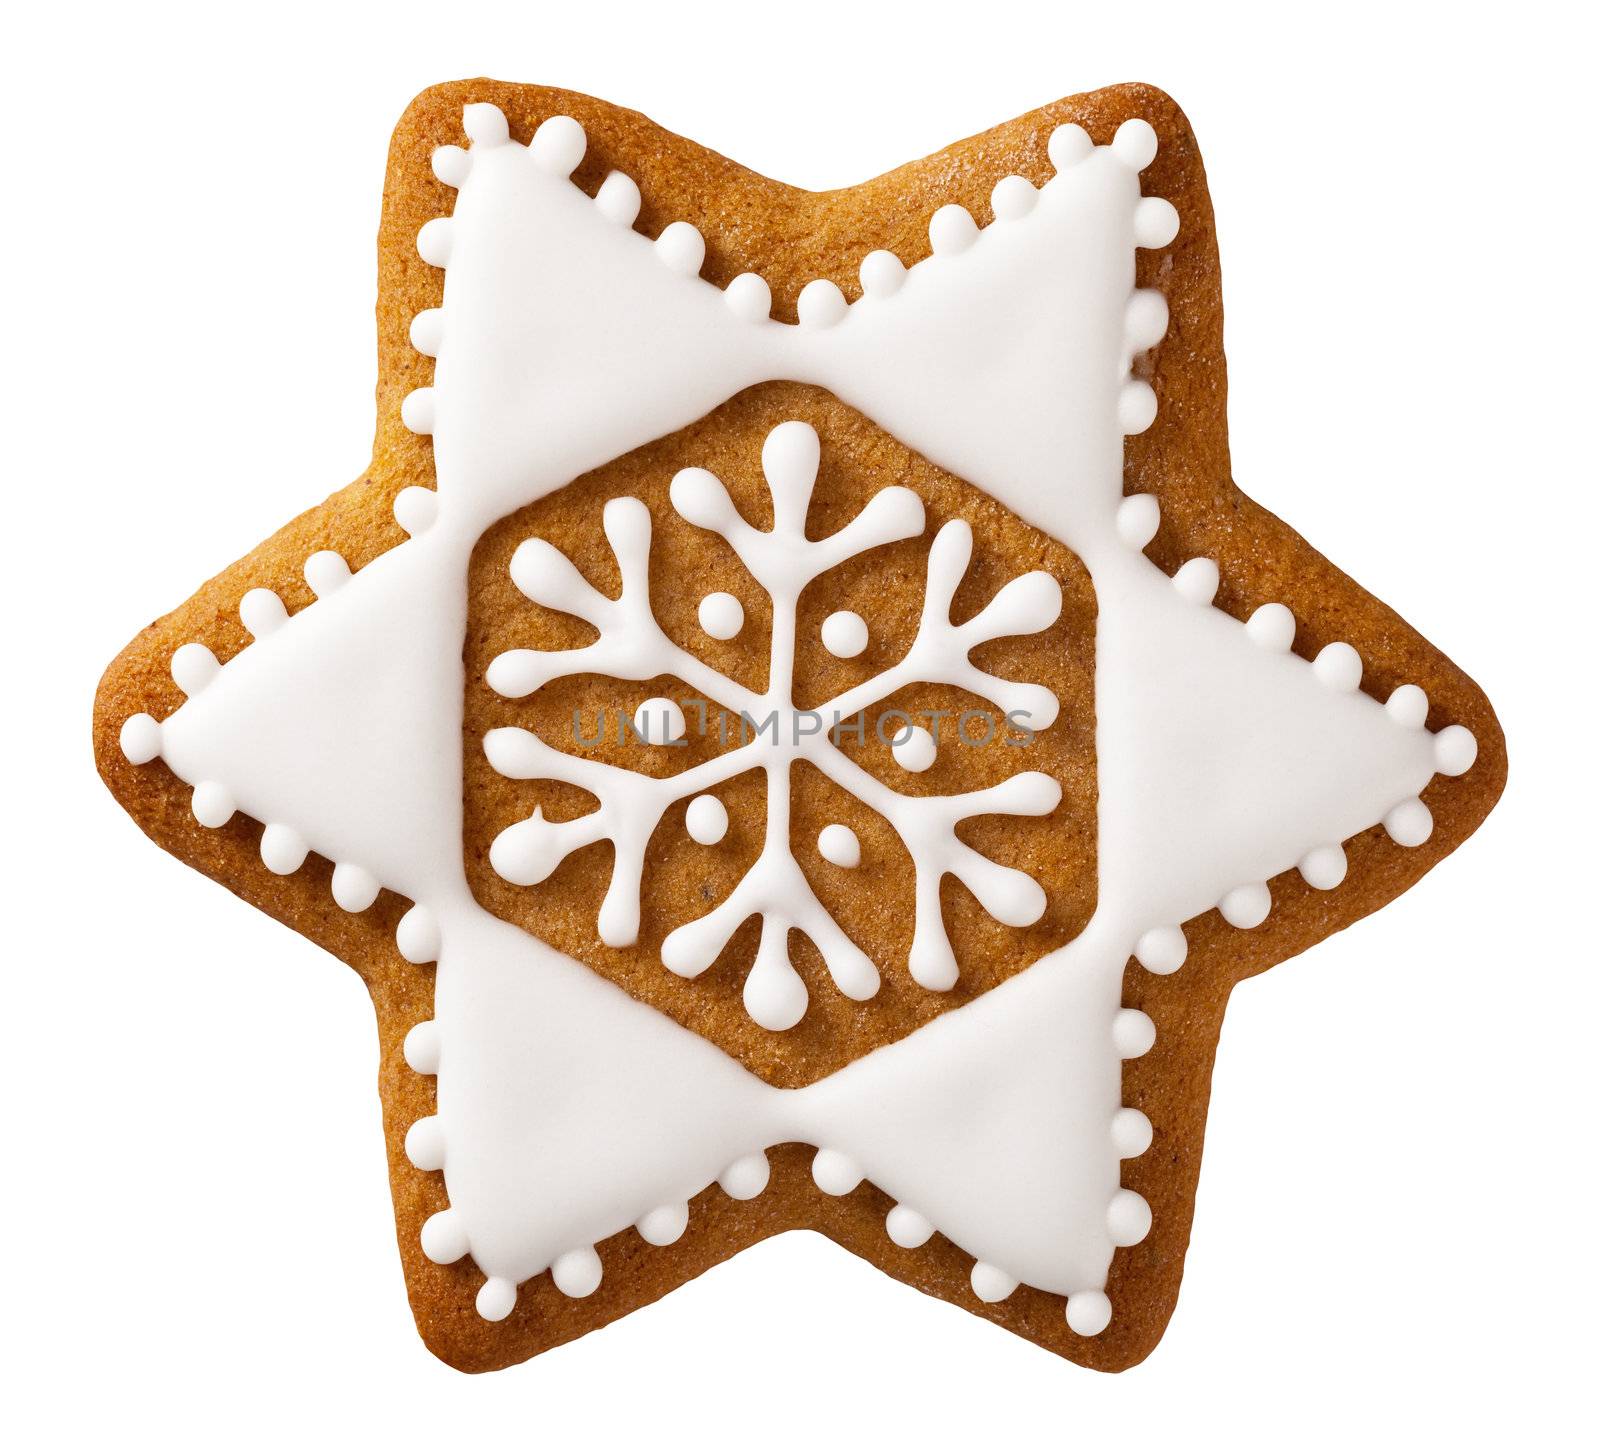 Christmas gingerbread isolated on white background, star shape